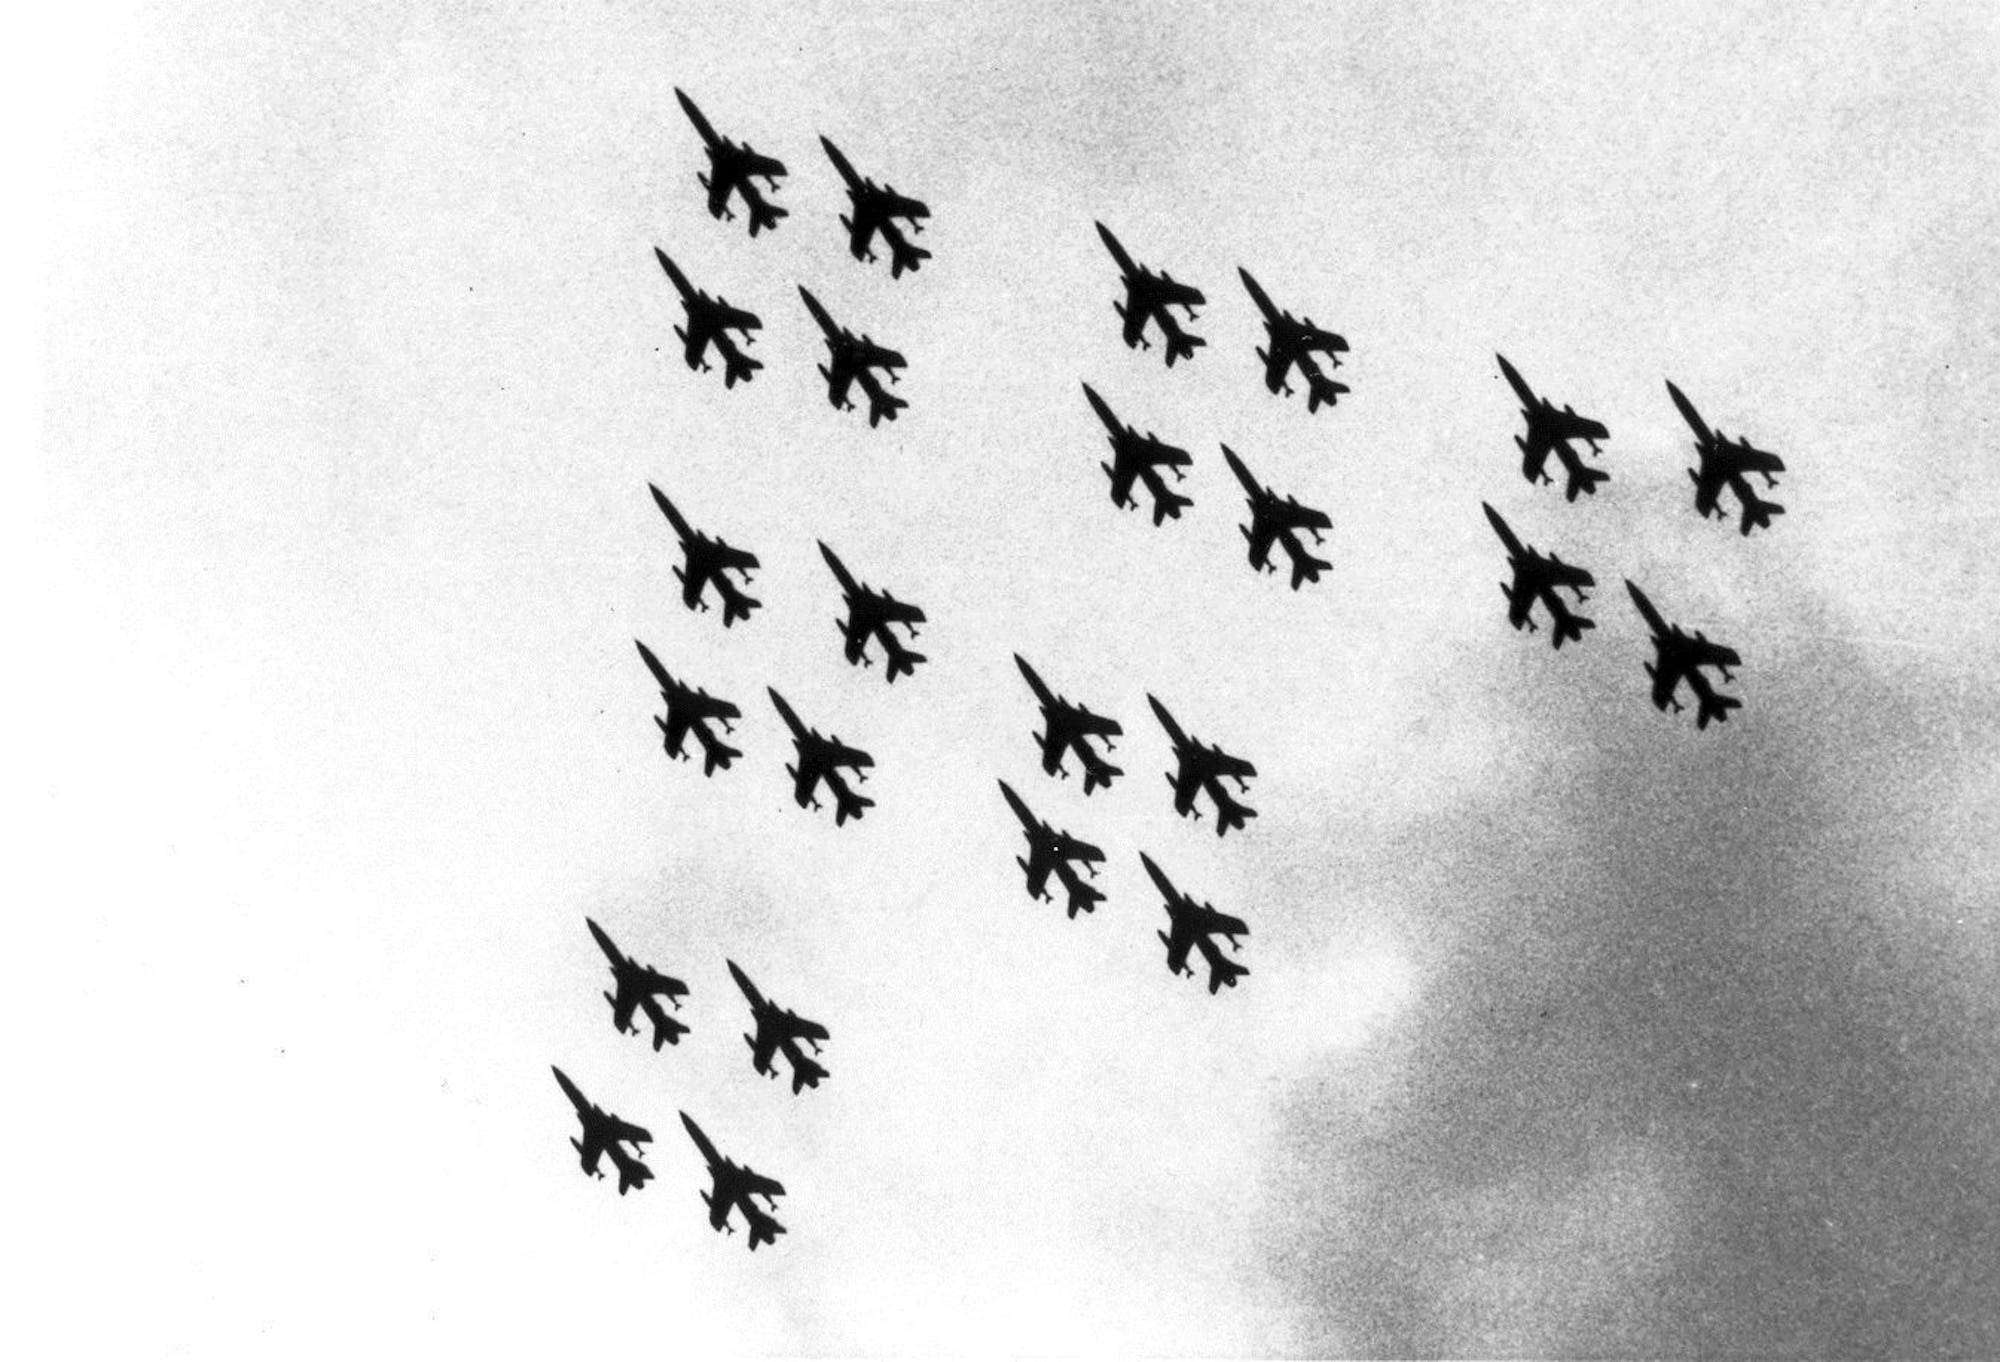 The 419th Tactical Fighter Wing says goodbye to the F-105 Thunderchief at Hill Air Force Base June 4, 1984. The farewell was complete with a 24-ship flyover to commemorate the occasion. The event saluted an aircraft that played an important part in USAF history and focused on the continuing modernization of the Air Force Reserve. (File photo)